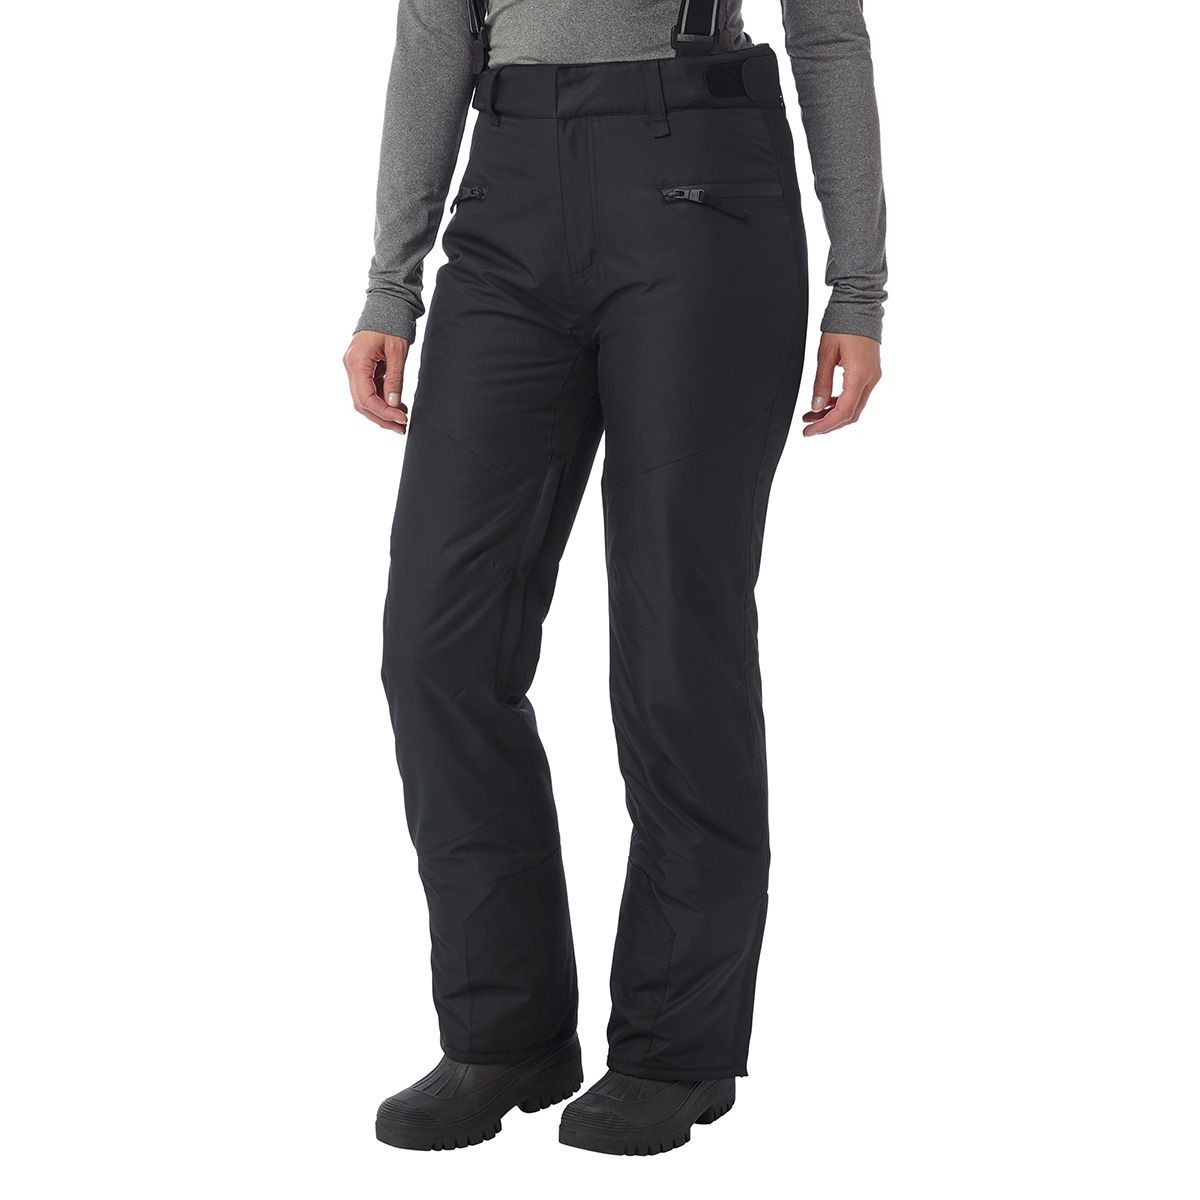 Practical ski wear without the sky-high price point. These snug salopettes offer waterproof and breathable performance with reliable insulation and sleek, ergonomic design. The legs feature reinforced panels, snow gaiters, articulated knee darts and soft tricot patches plus inner thigh zip vents for comfort. Complete with adjustable, detachable braces.